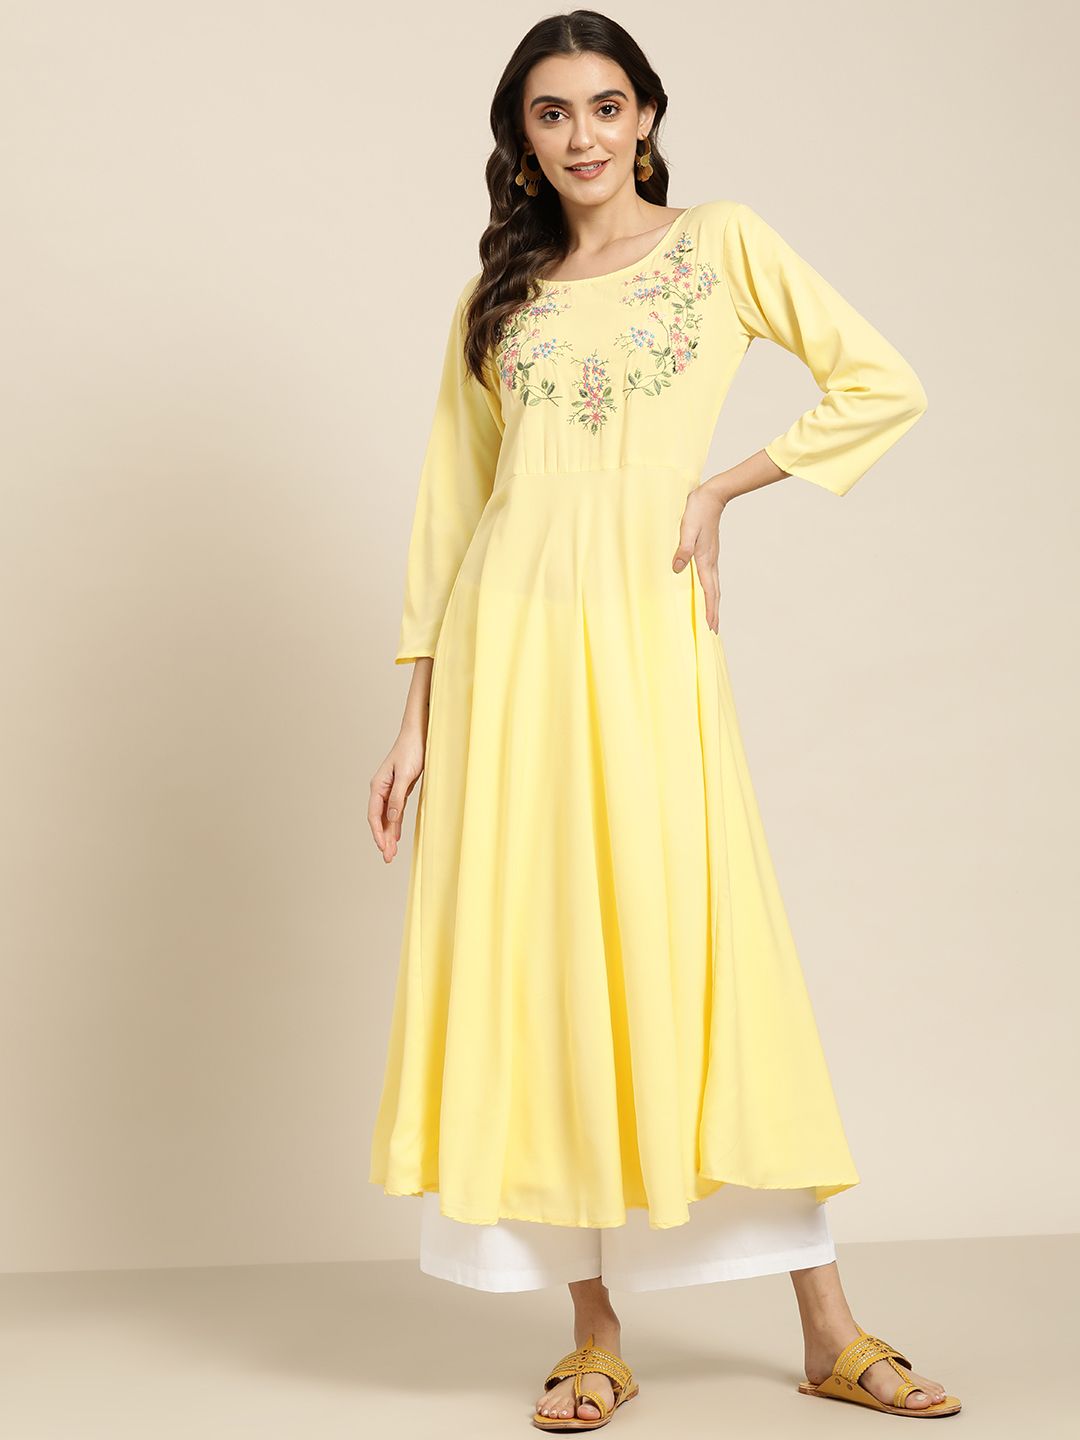 Jompers Women Yellow & Green Floral Embroidered Georgette Anarkali Kurta Price in India